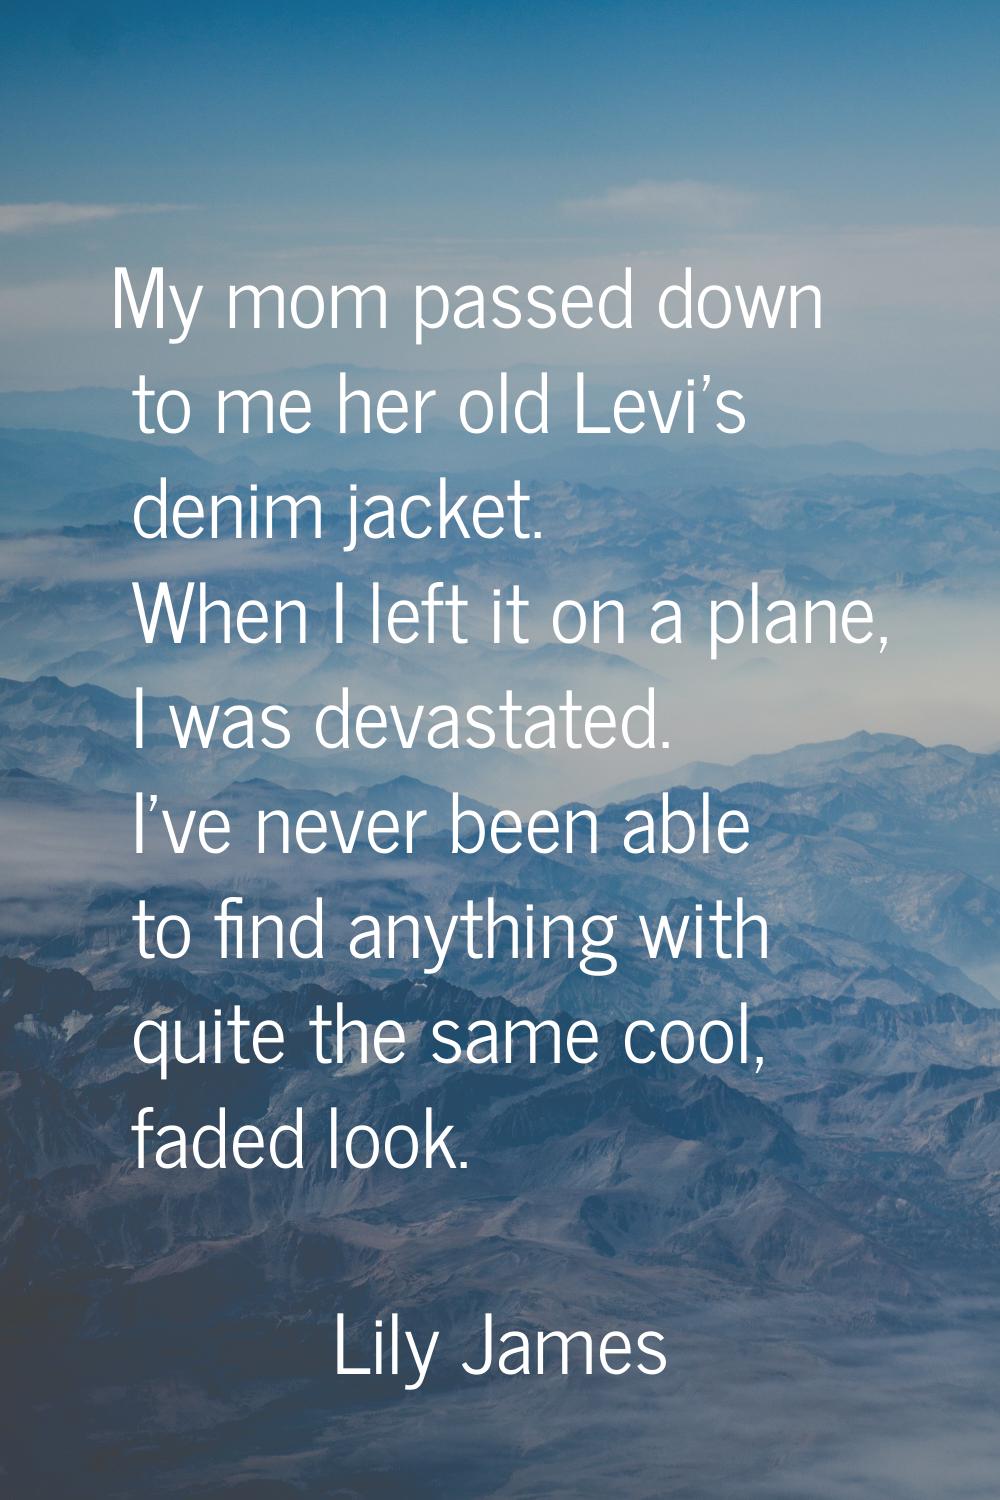 My mom passed down to me her old Levi's denim jacket. When I left it on a plane, I was devastated. 